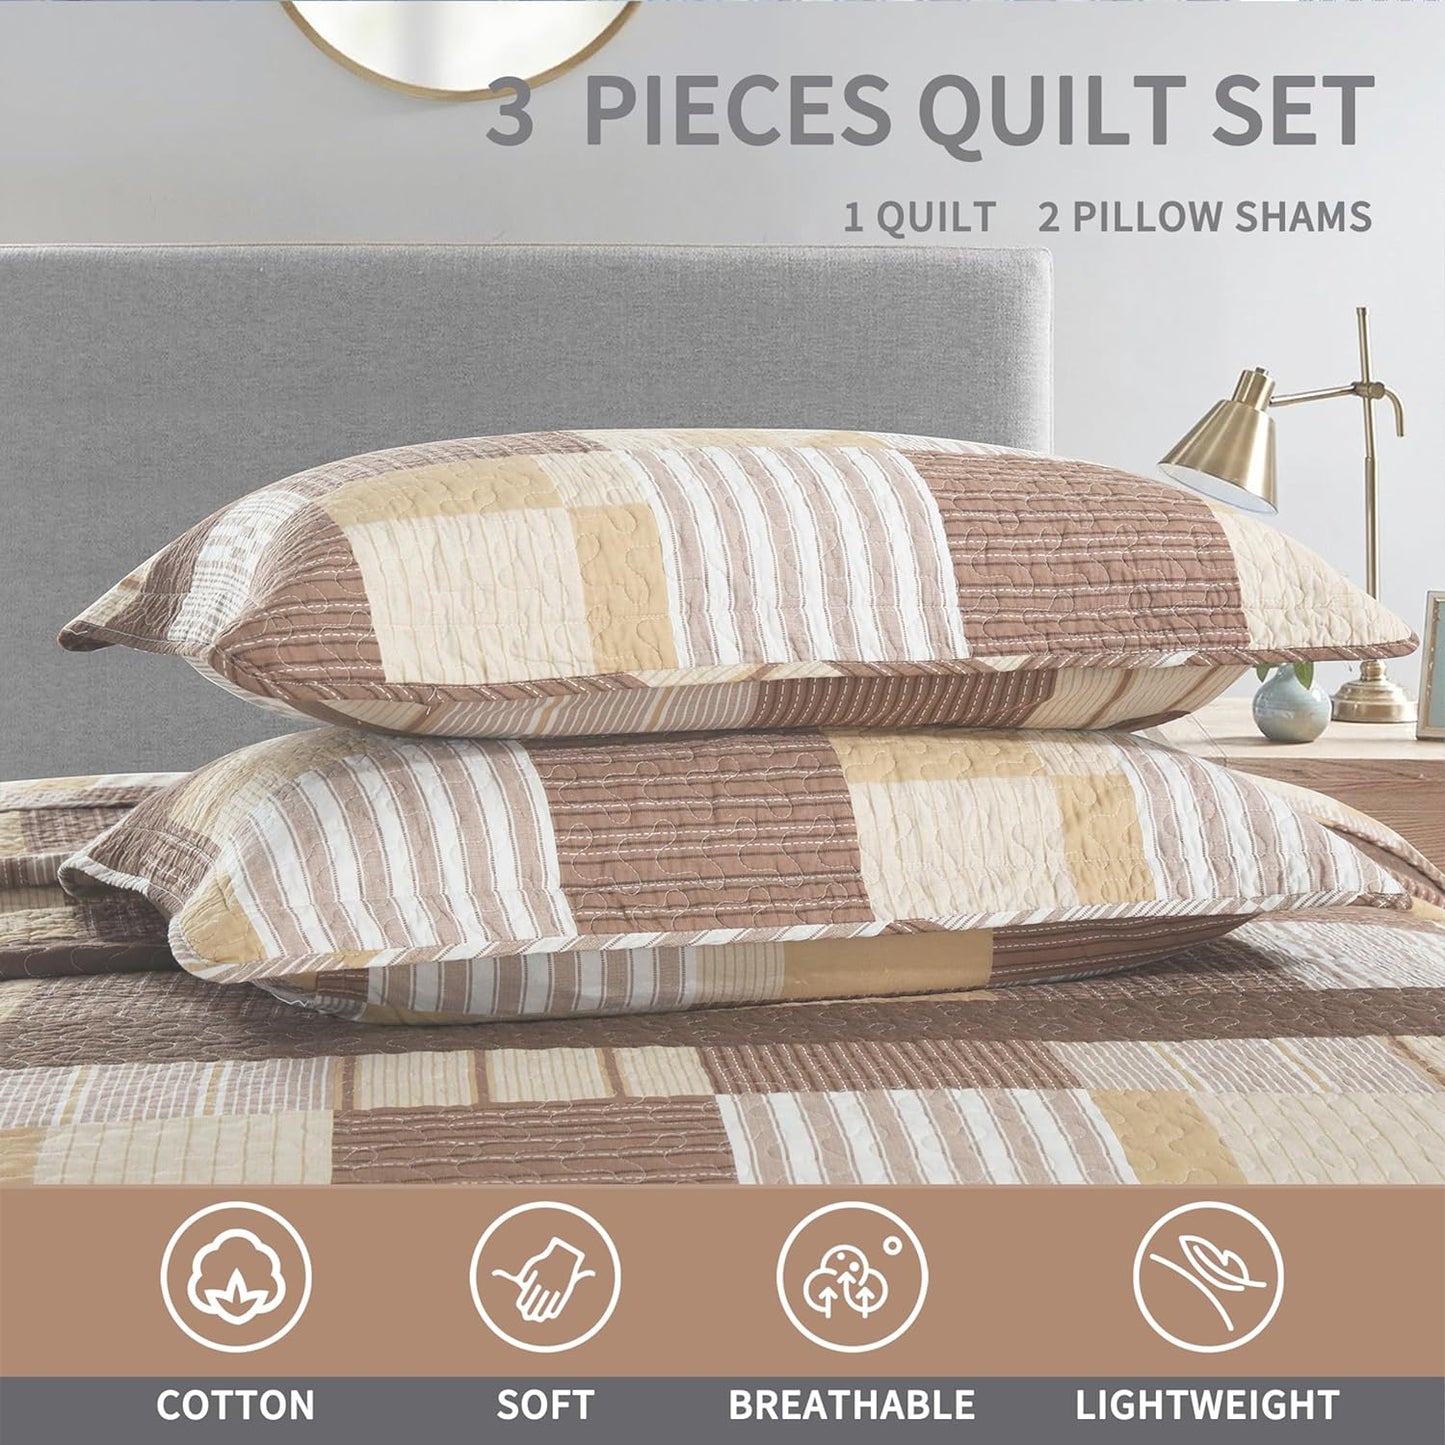 Quilt King Size-100% Cotton Brow Comforter Set King Size,Brown Plaid King Quilt Bedding King,Reversible Lightweight King Comforter Set,Tan White Lightweight Bedding 3 Pc